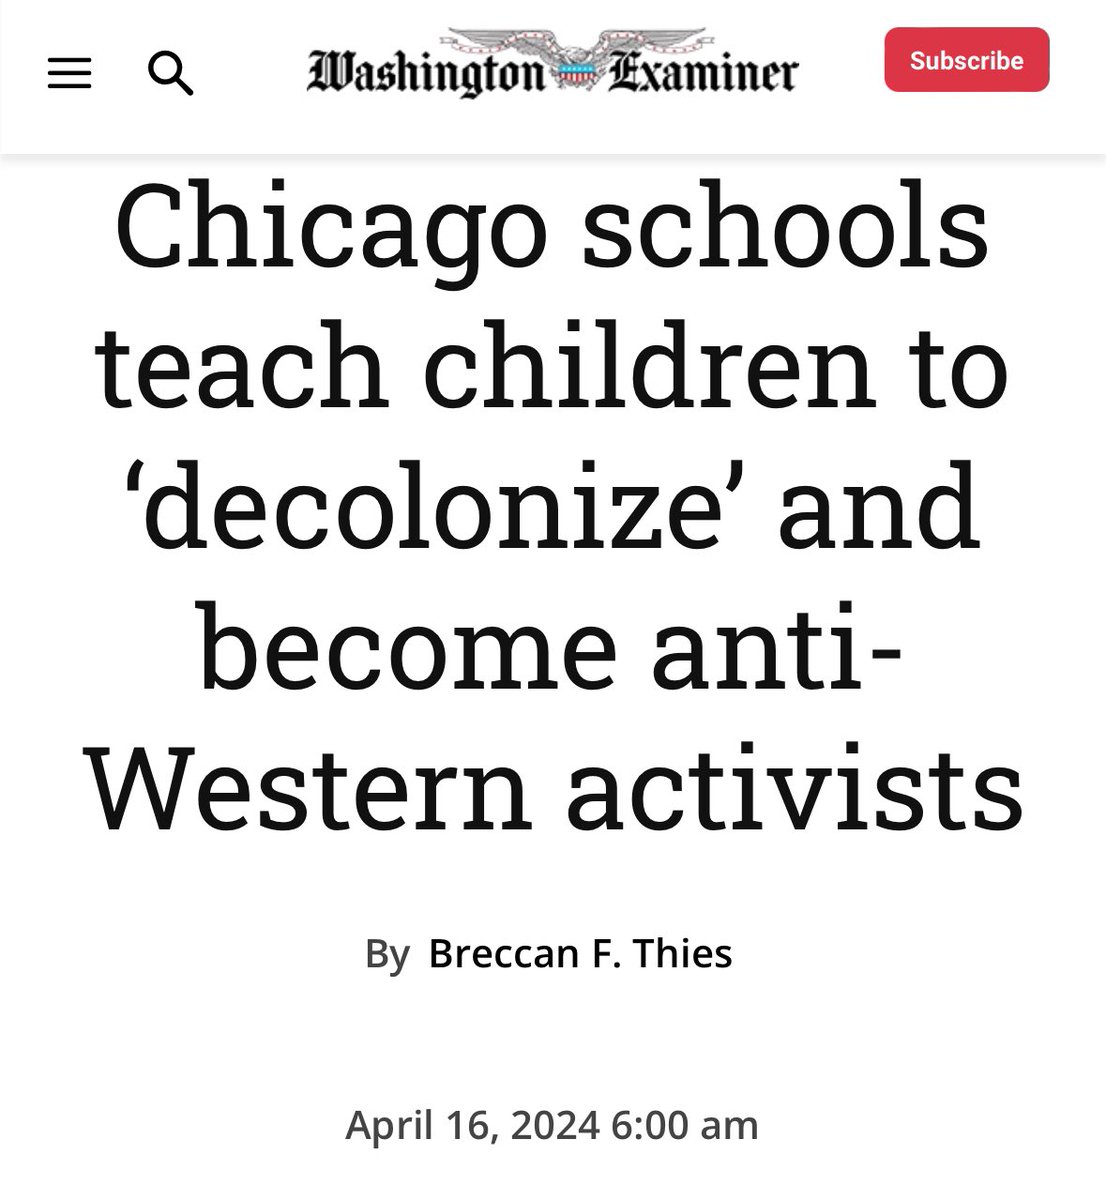 To put it bluntly, 14-year-old children in America’s third-largest city are barely able to read, yet instead of remediating this crisis, Chicago Public Schools chose to spend finite tax dollars to buy new curriculum using politically charged graphic novels. Students deserve to…